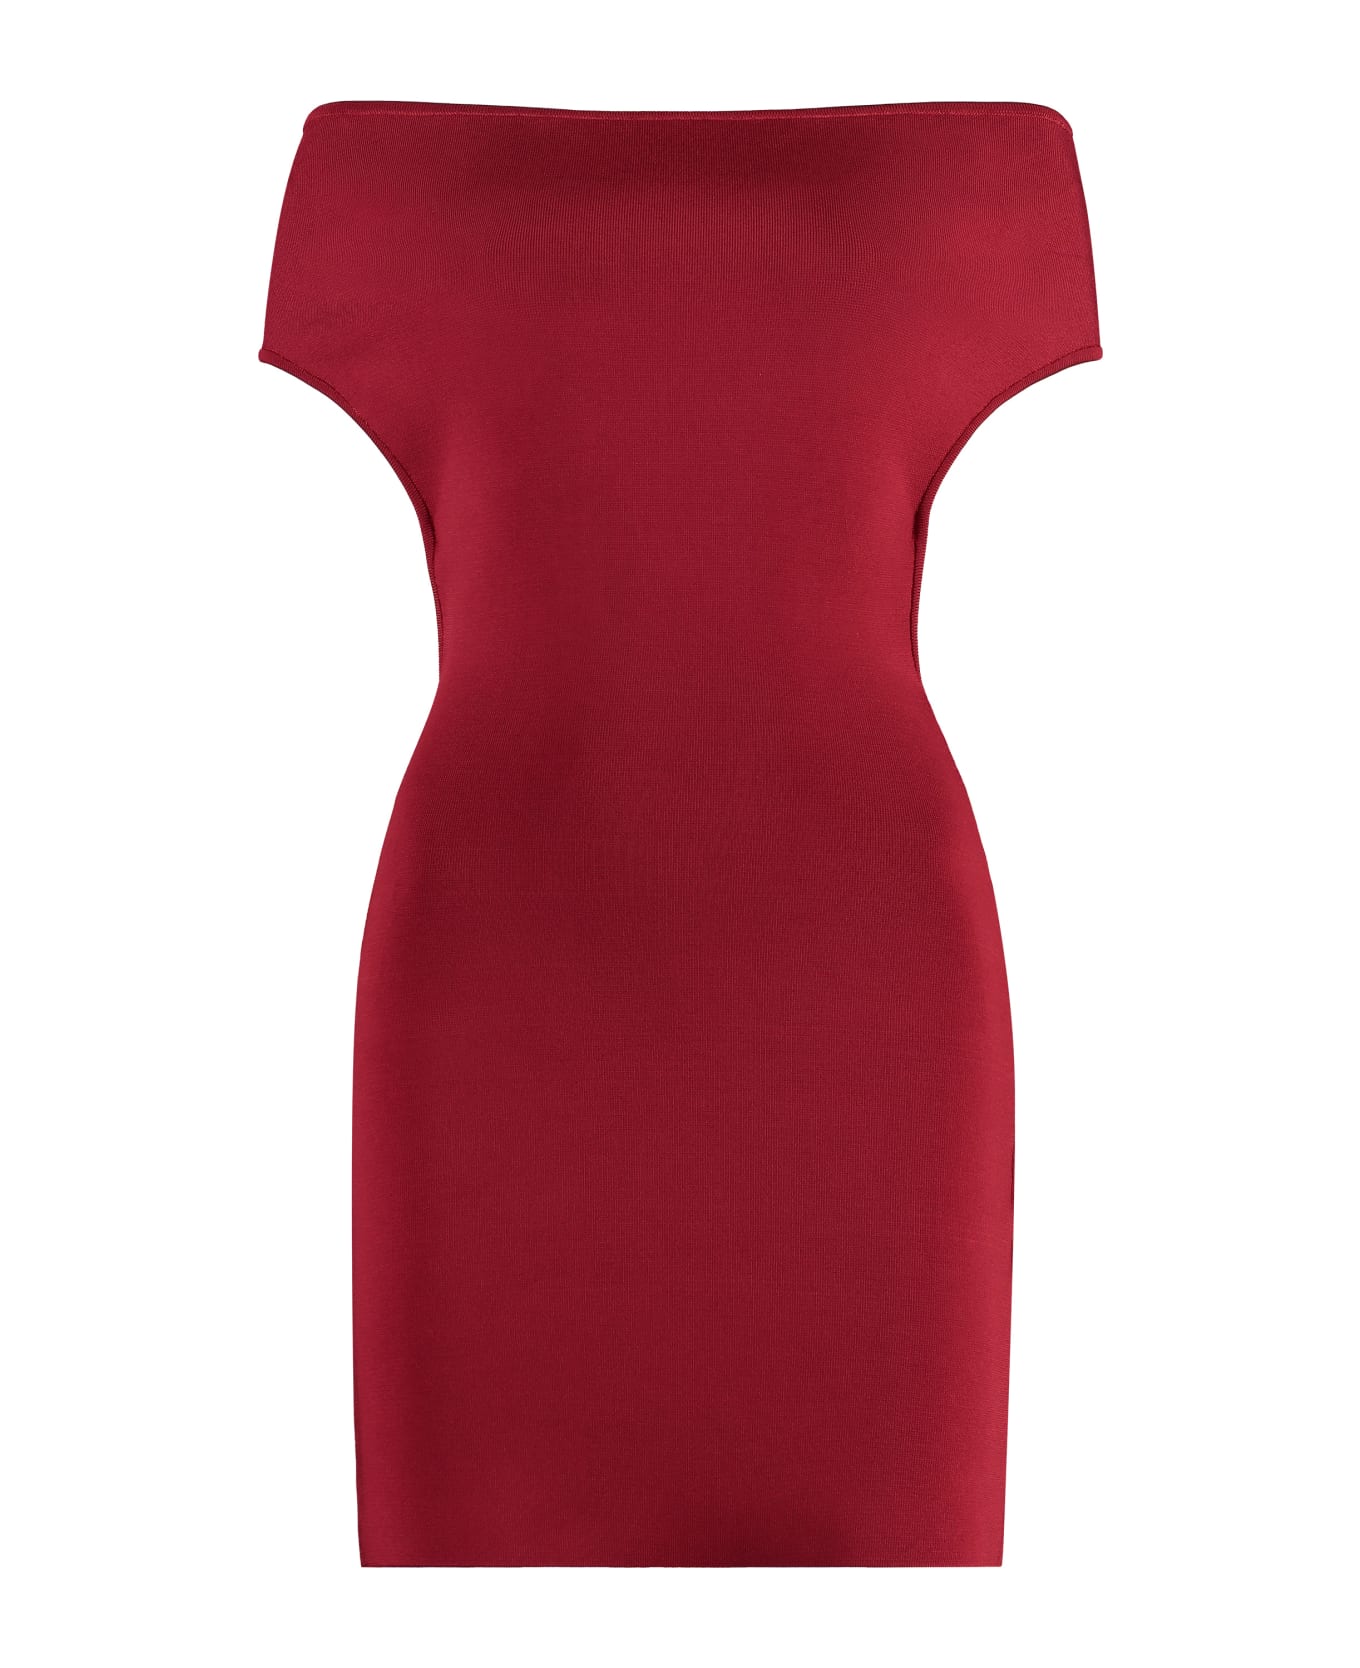 Jacquemus Cubista Knitted Dress - red